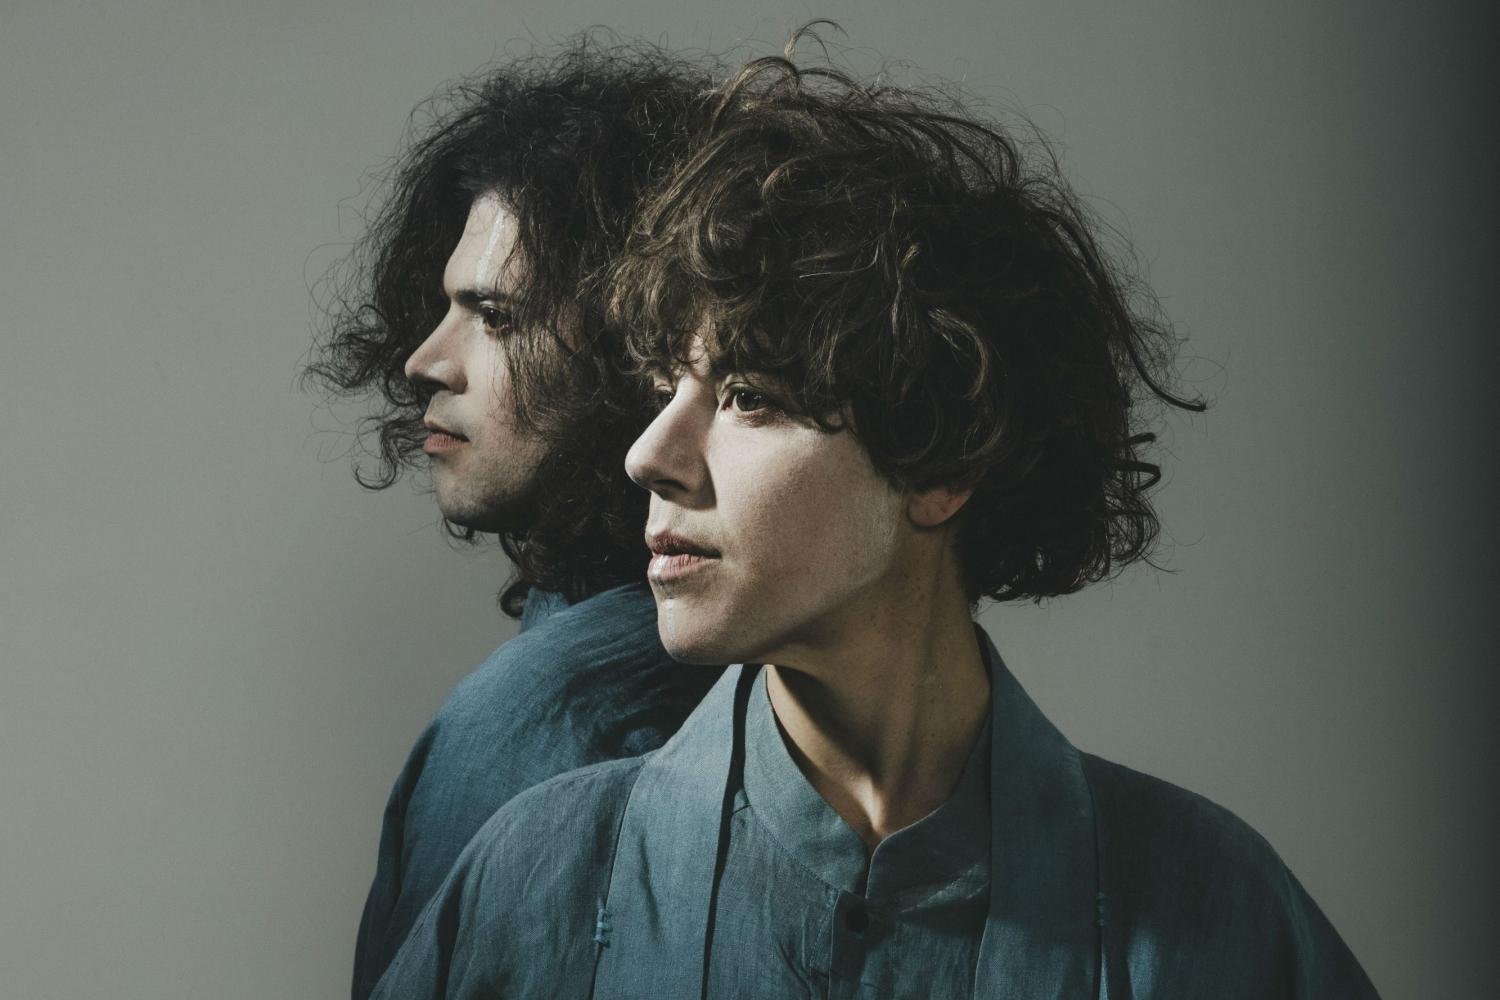 Tune-Yards announce new album; share first single 'Look at Your Hands'